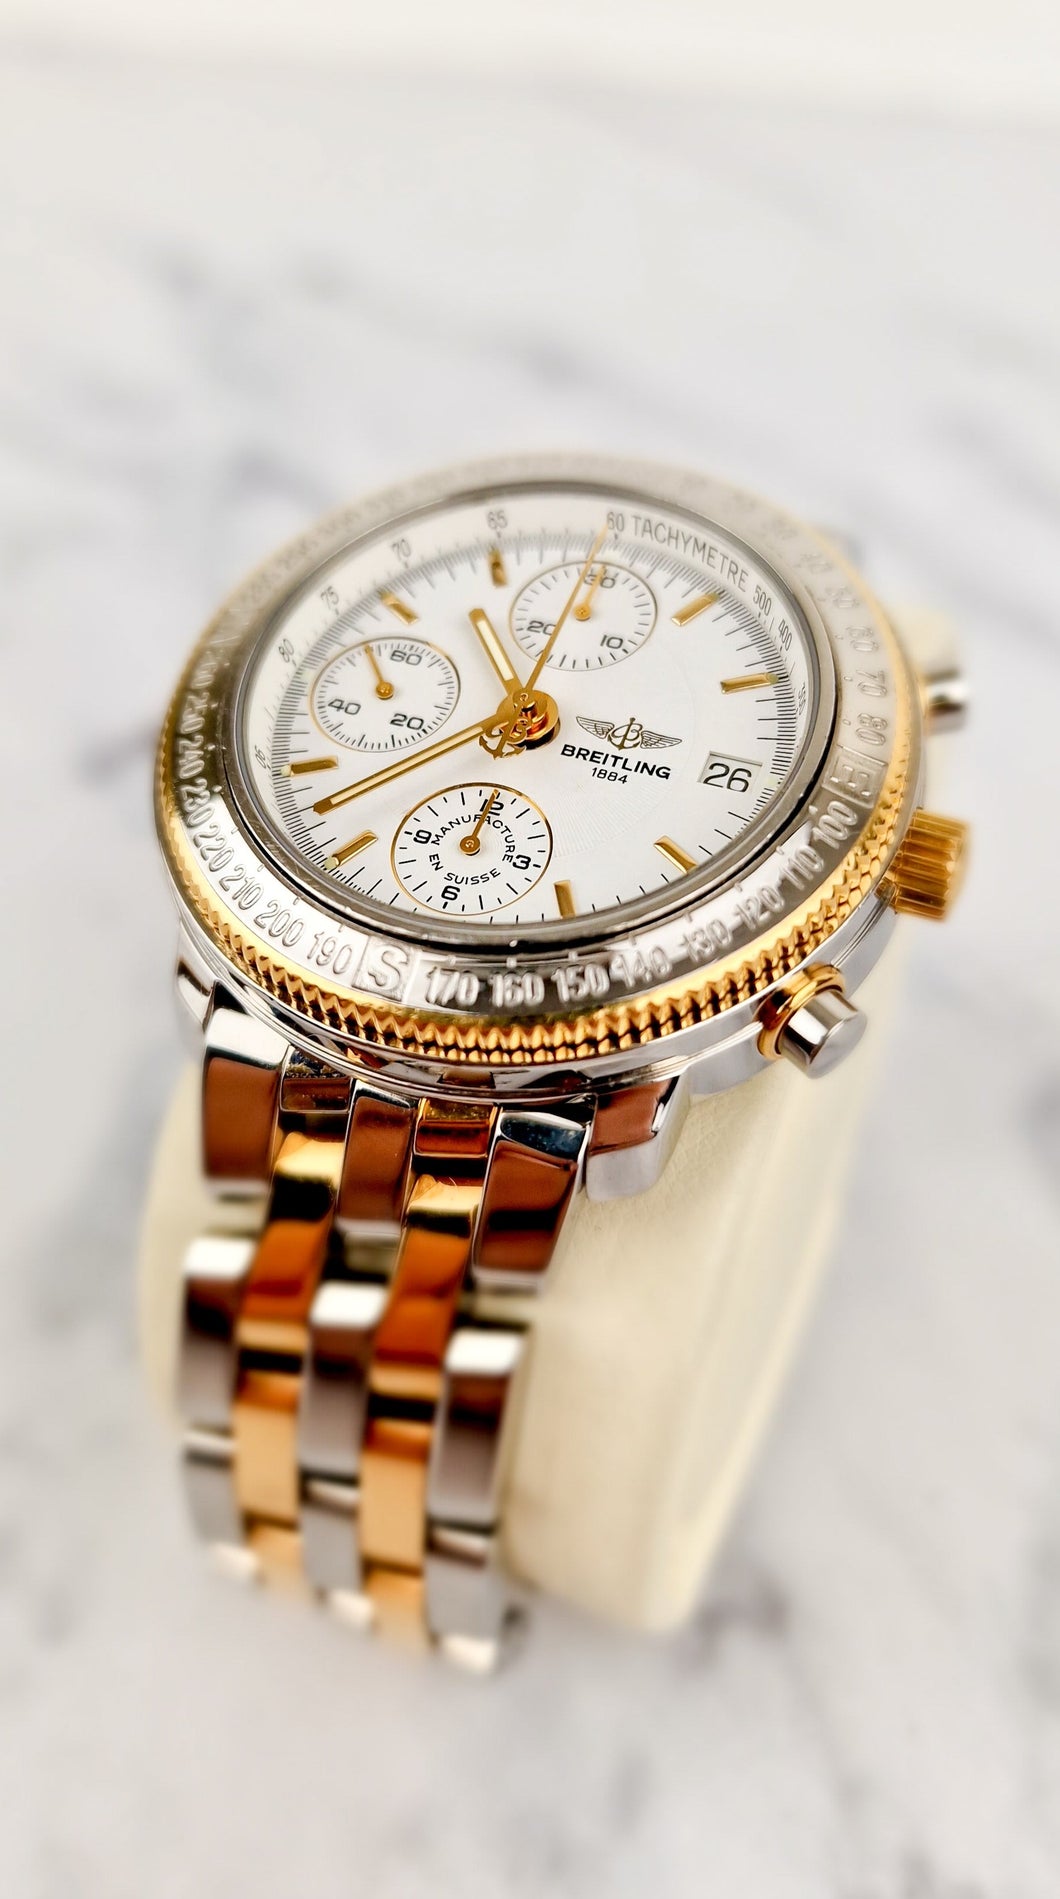 Breitling Astromat Longitude Special Limited Edition 18K Yellow Gold & Stainless Steel Watch D20405 1 of 700